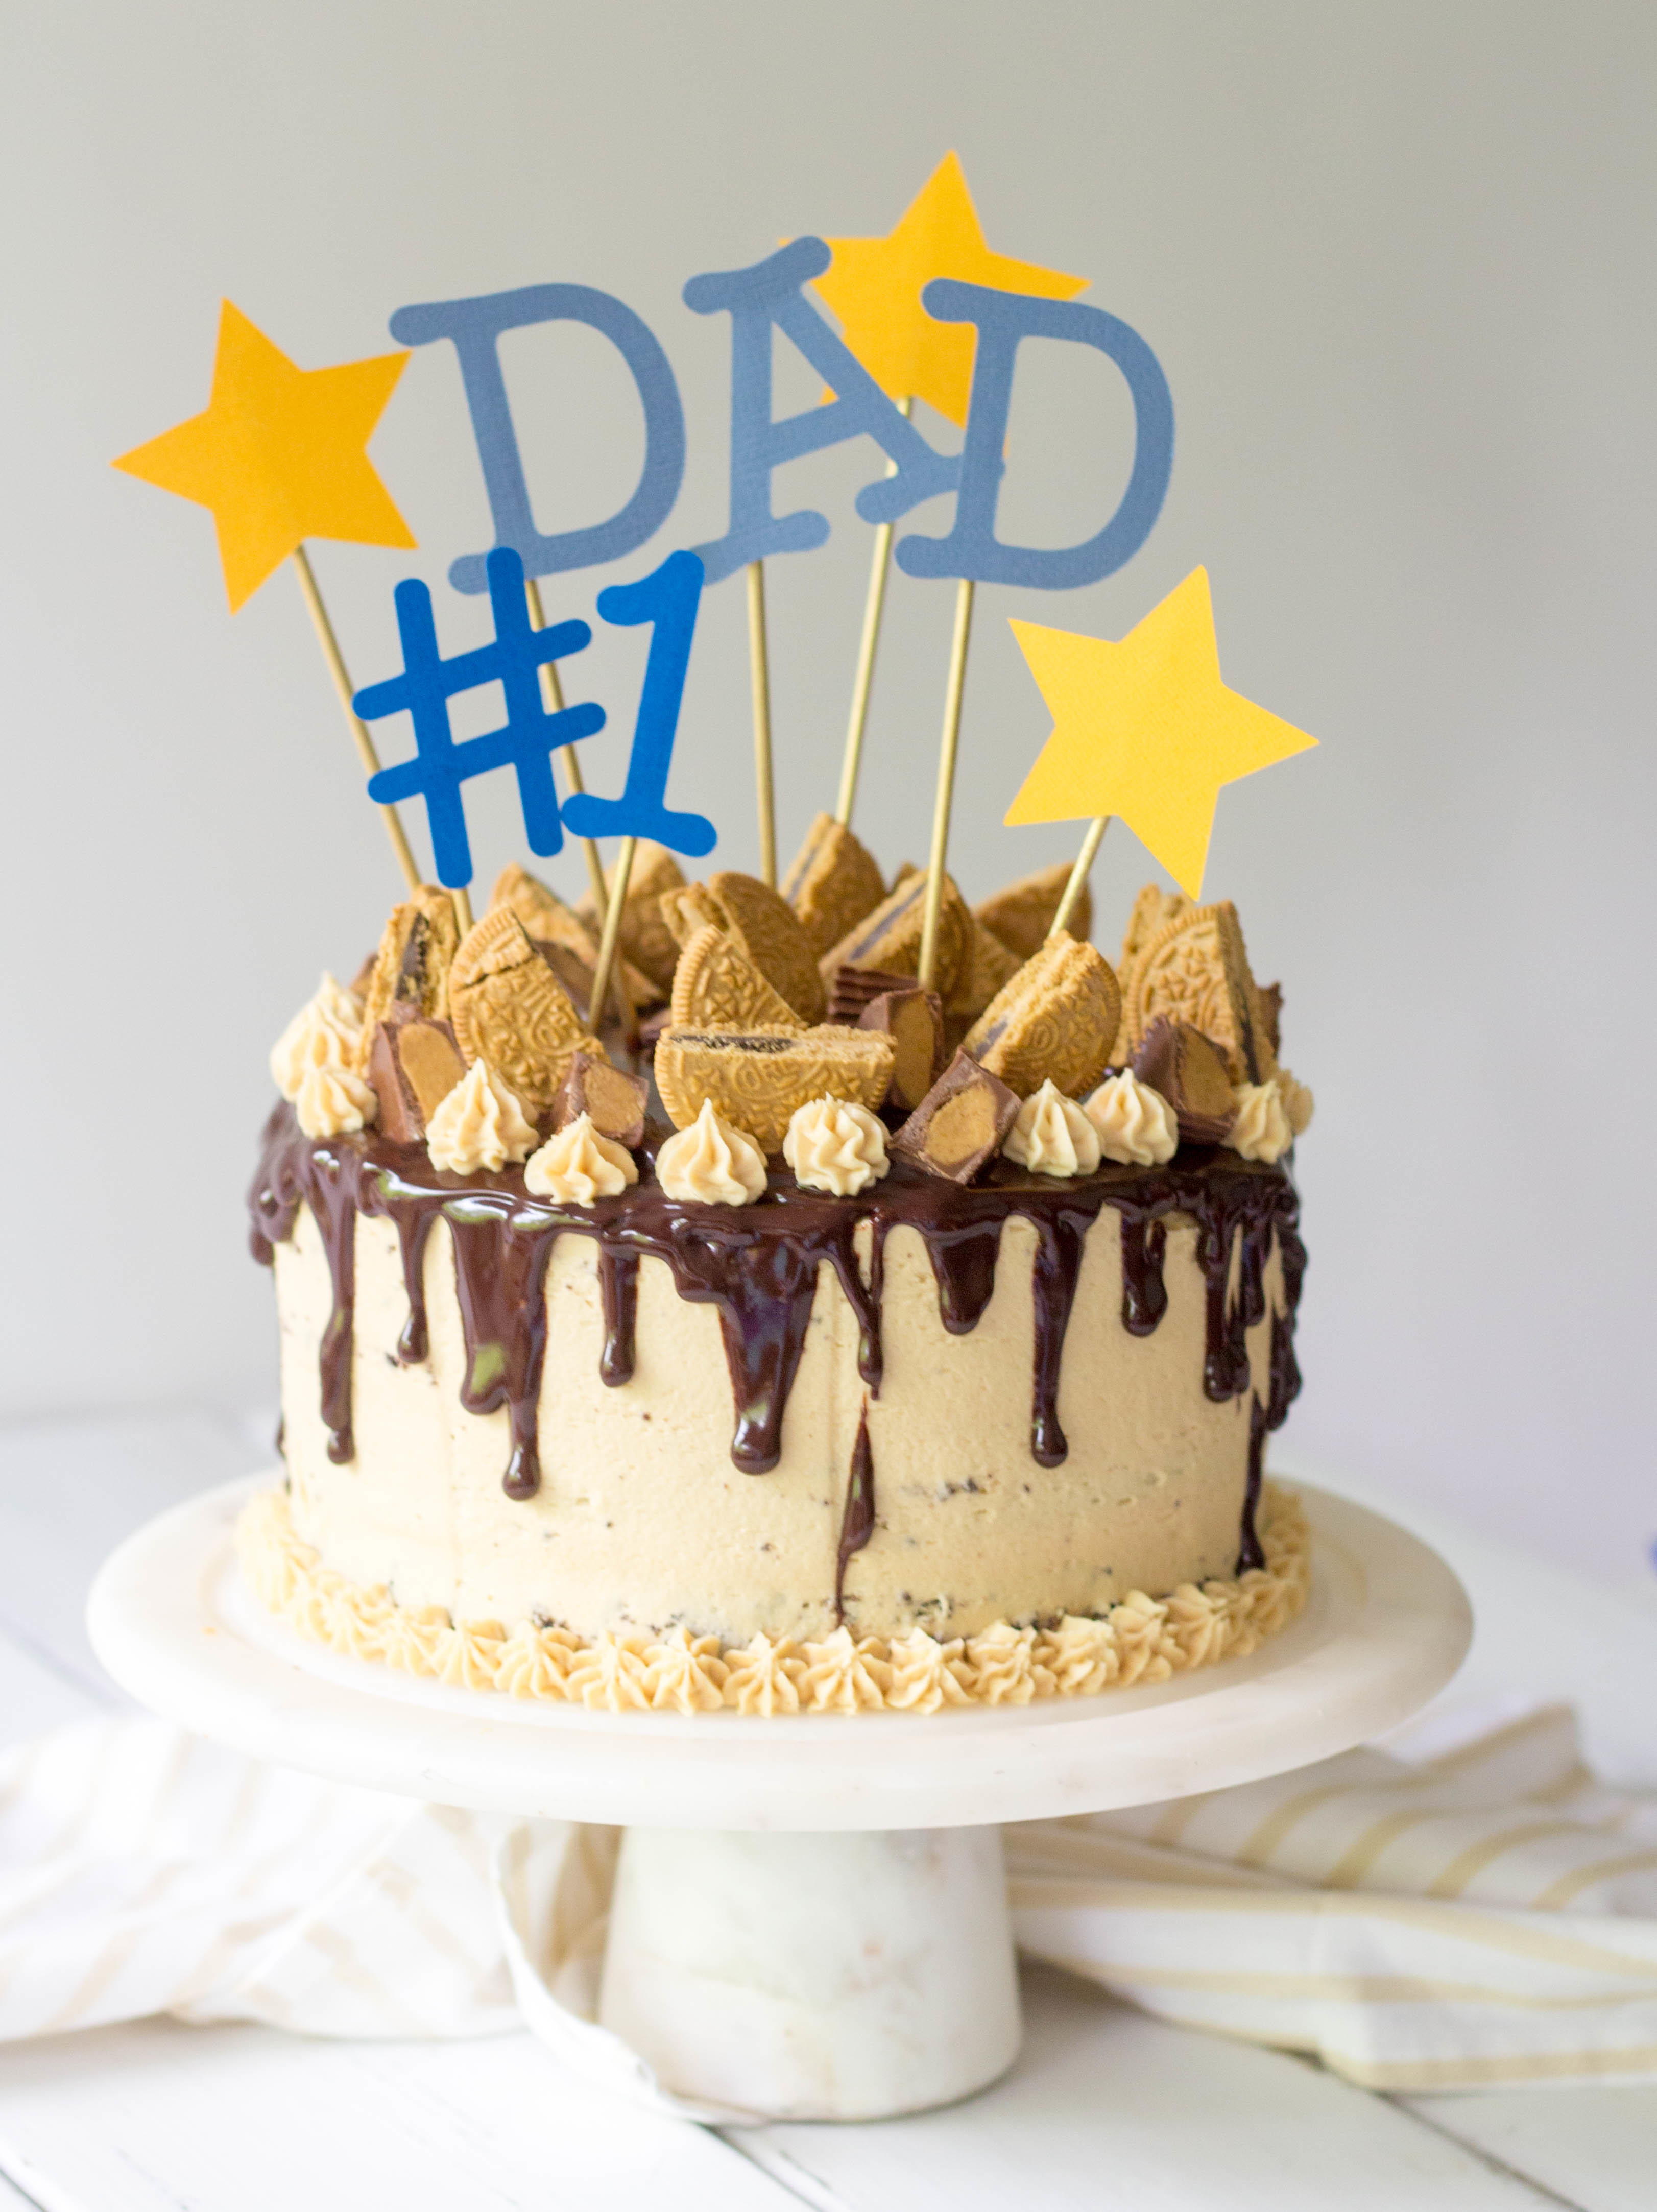 Father's Day Cake Offer - Get it Now!